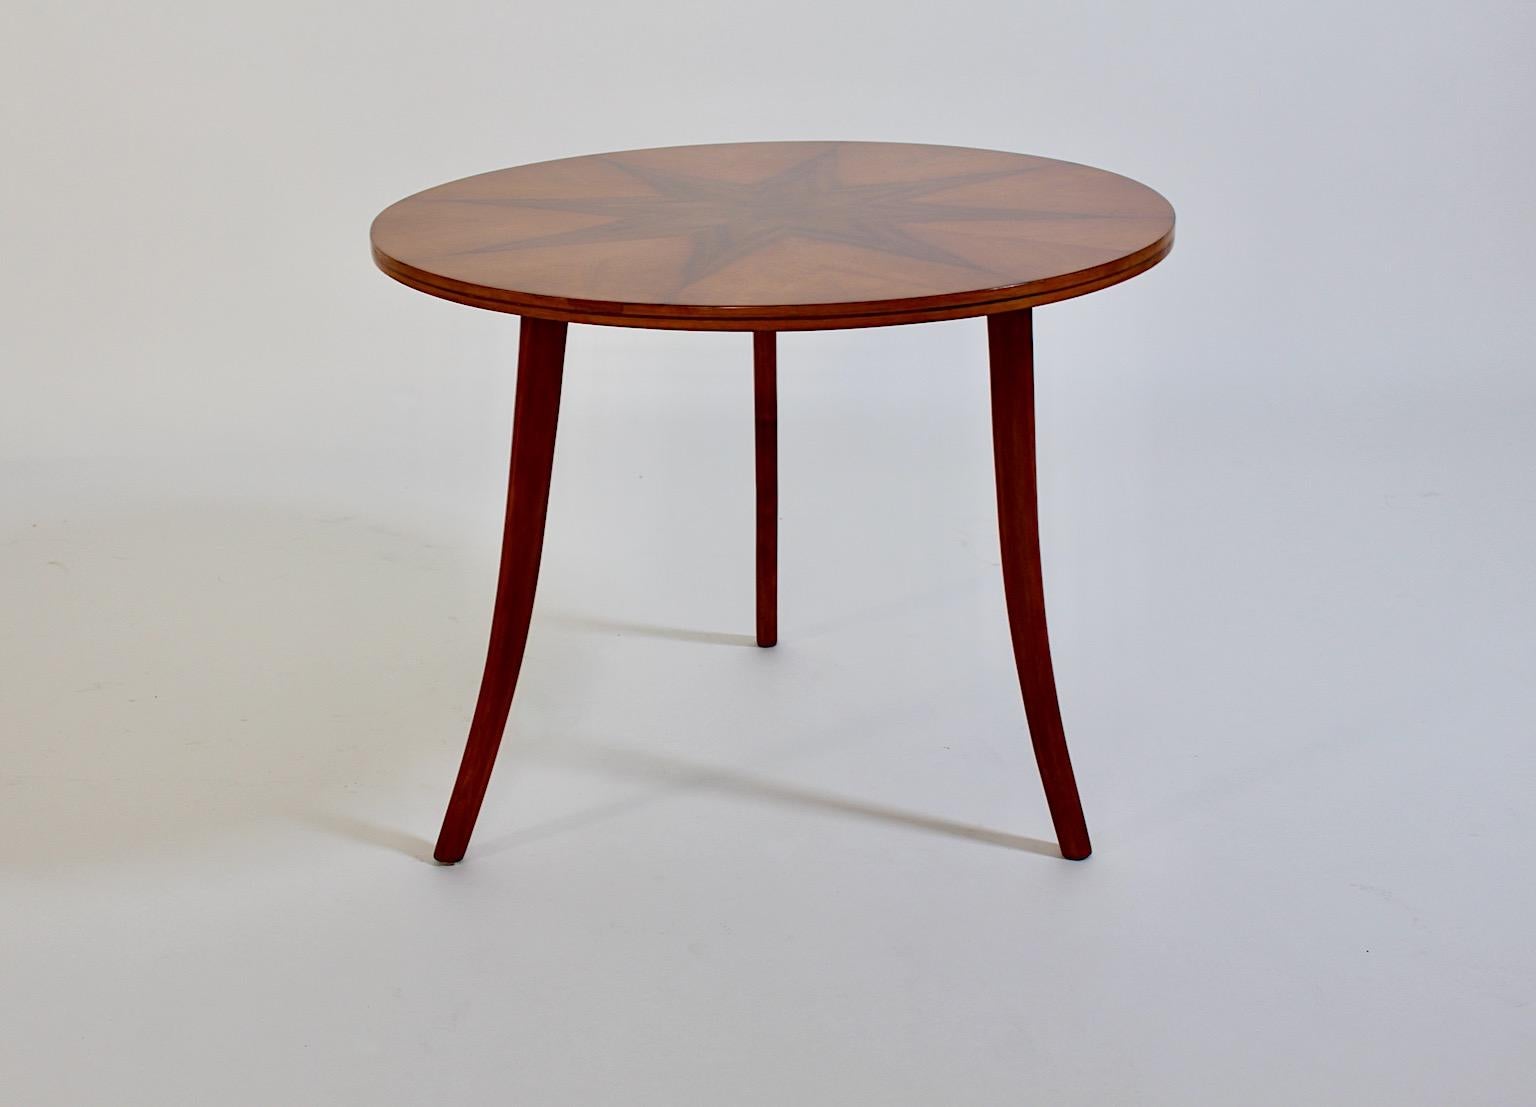 Art Deco vintage circular side table or coffee table by Josef Frank circa 1927 Vienna.
A stunning circular side table with 3 slightly curved feet topped with a beautiful veneered plate showing a veneer picture like a star.
This side table is shellac